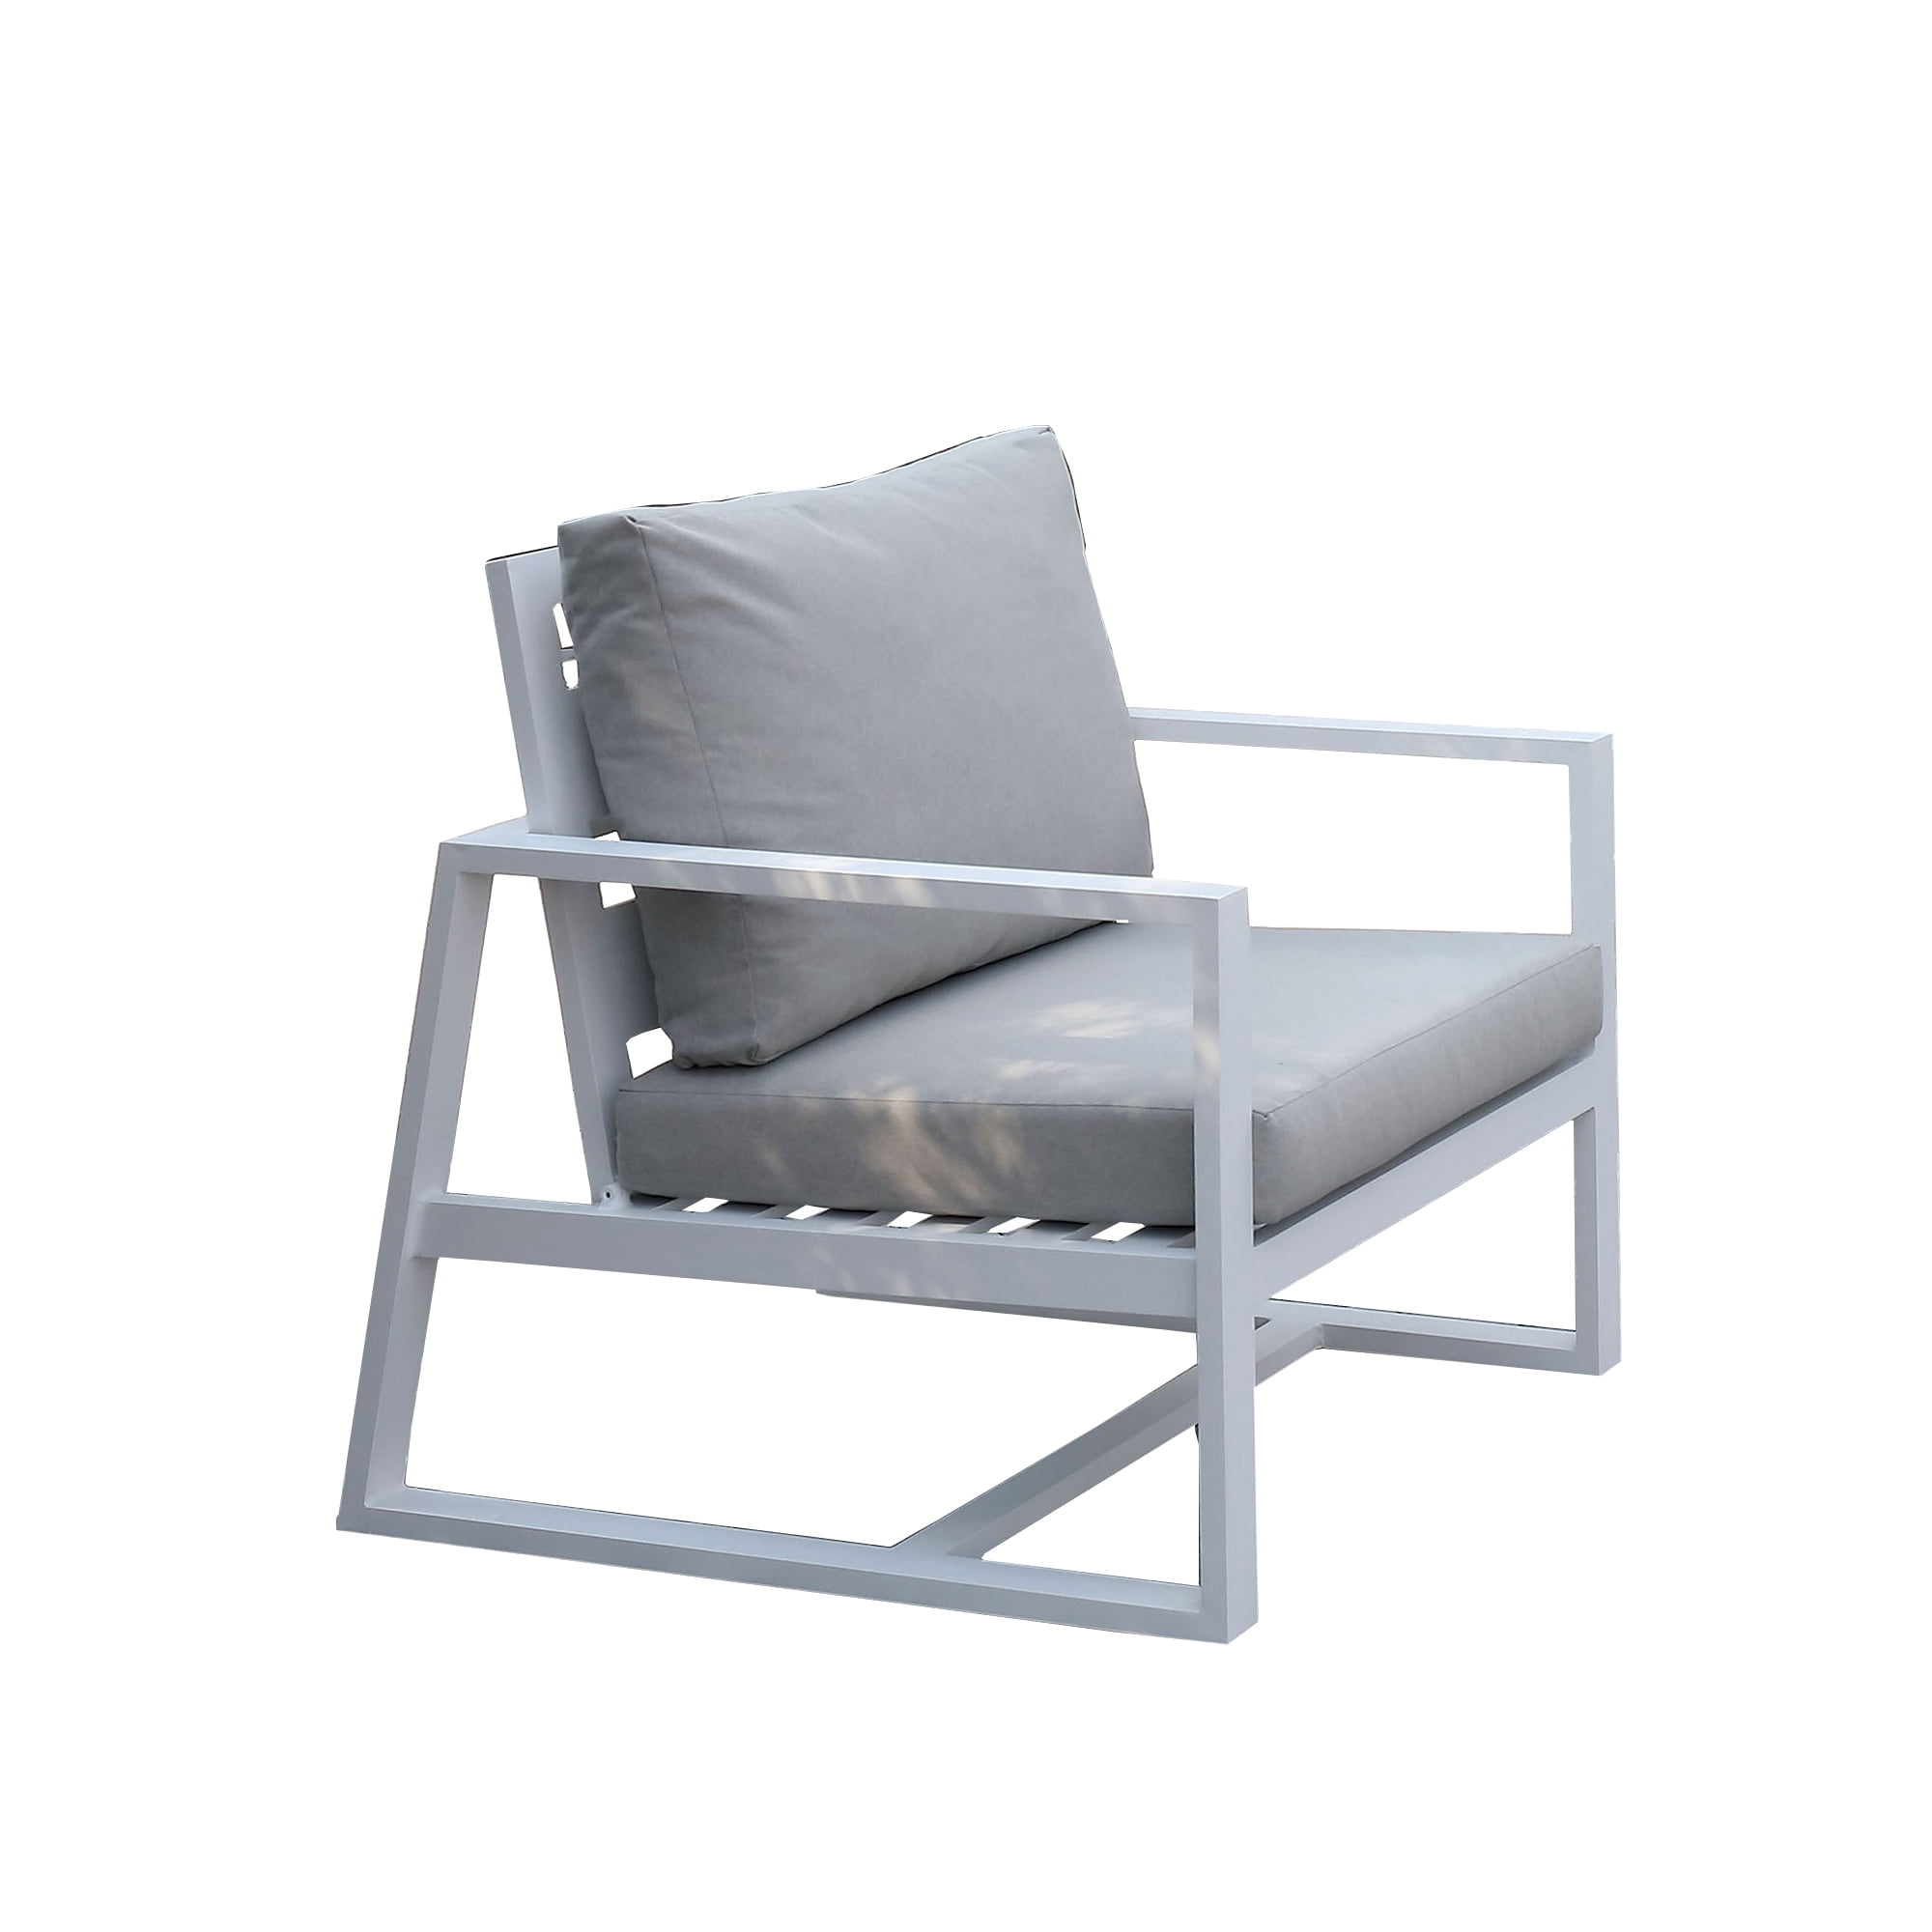 Benjara BM206271 Aluminum Frame Arm Chair with Removable Seating White Set of 2 